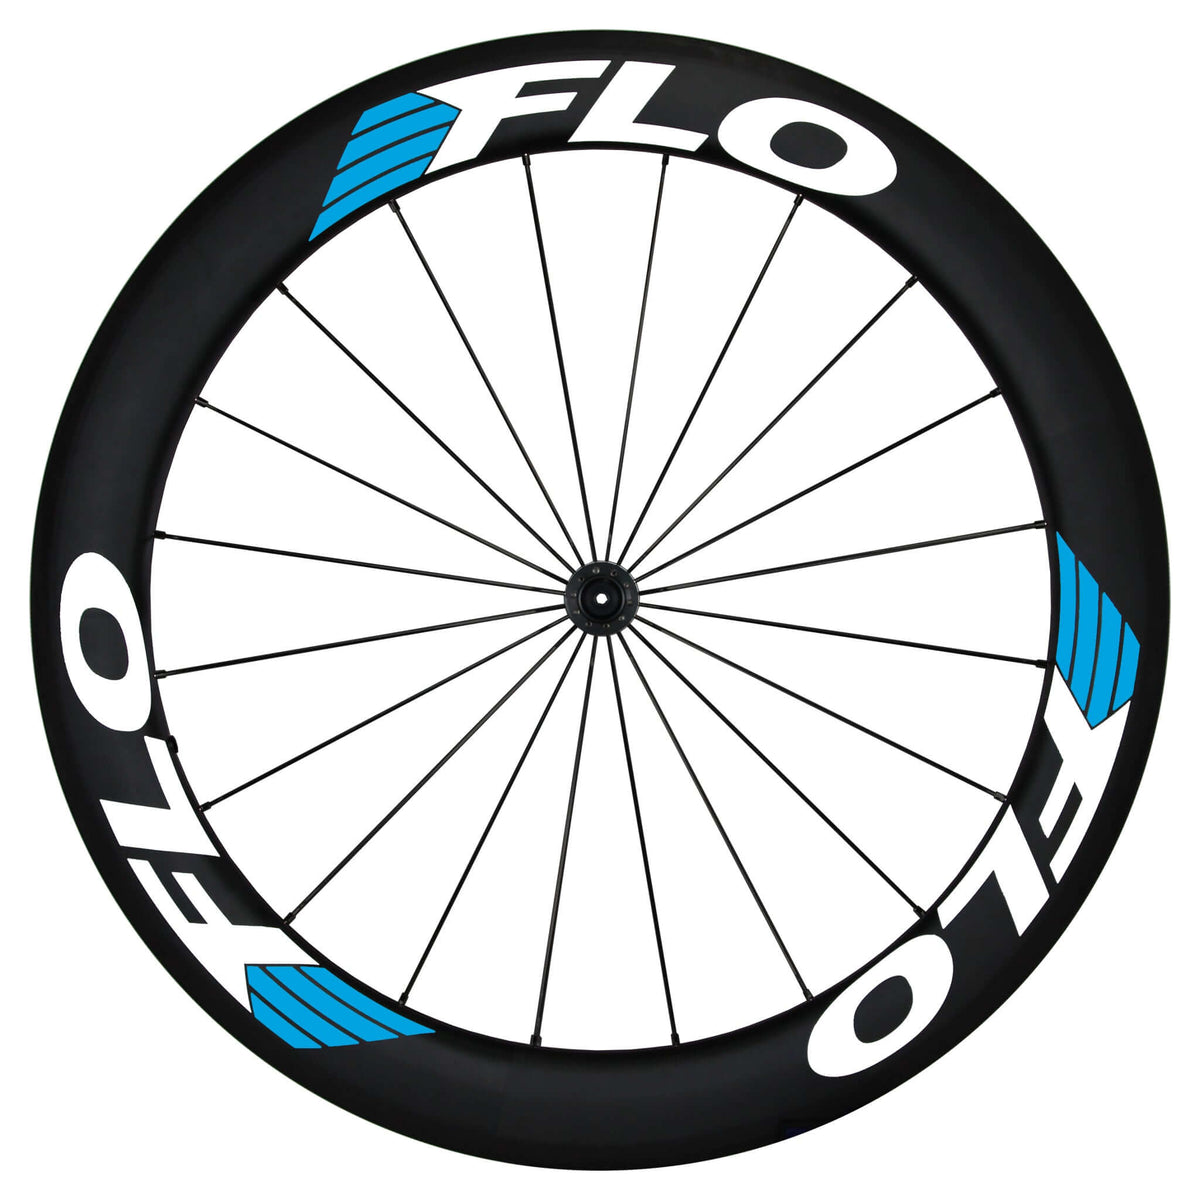 FLO 64 AS - Fast & Stable Carbon Wheels